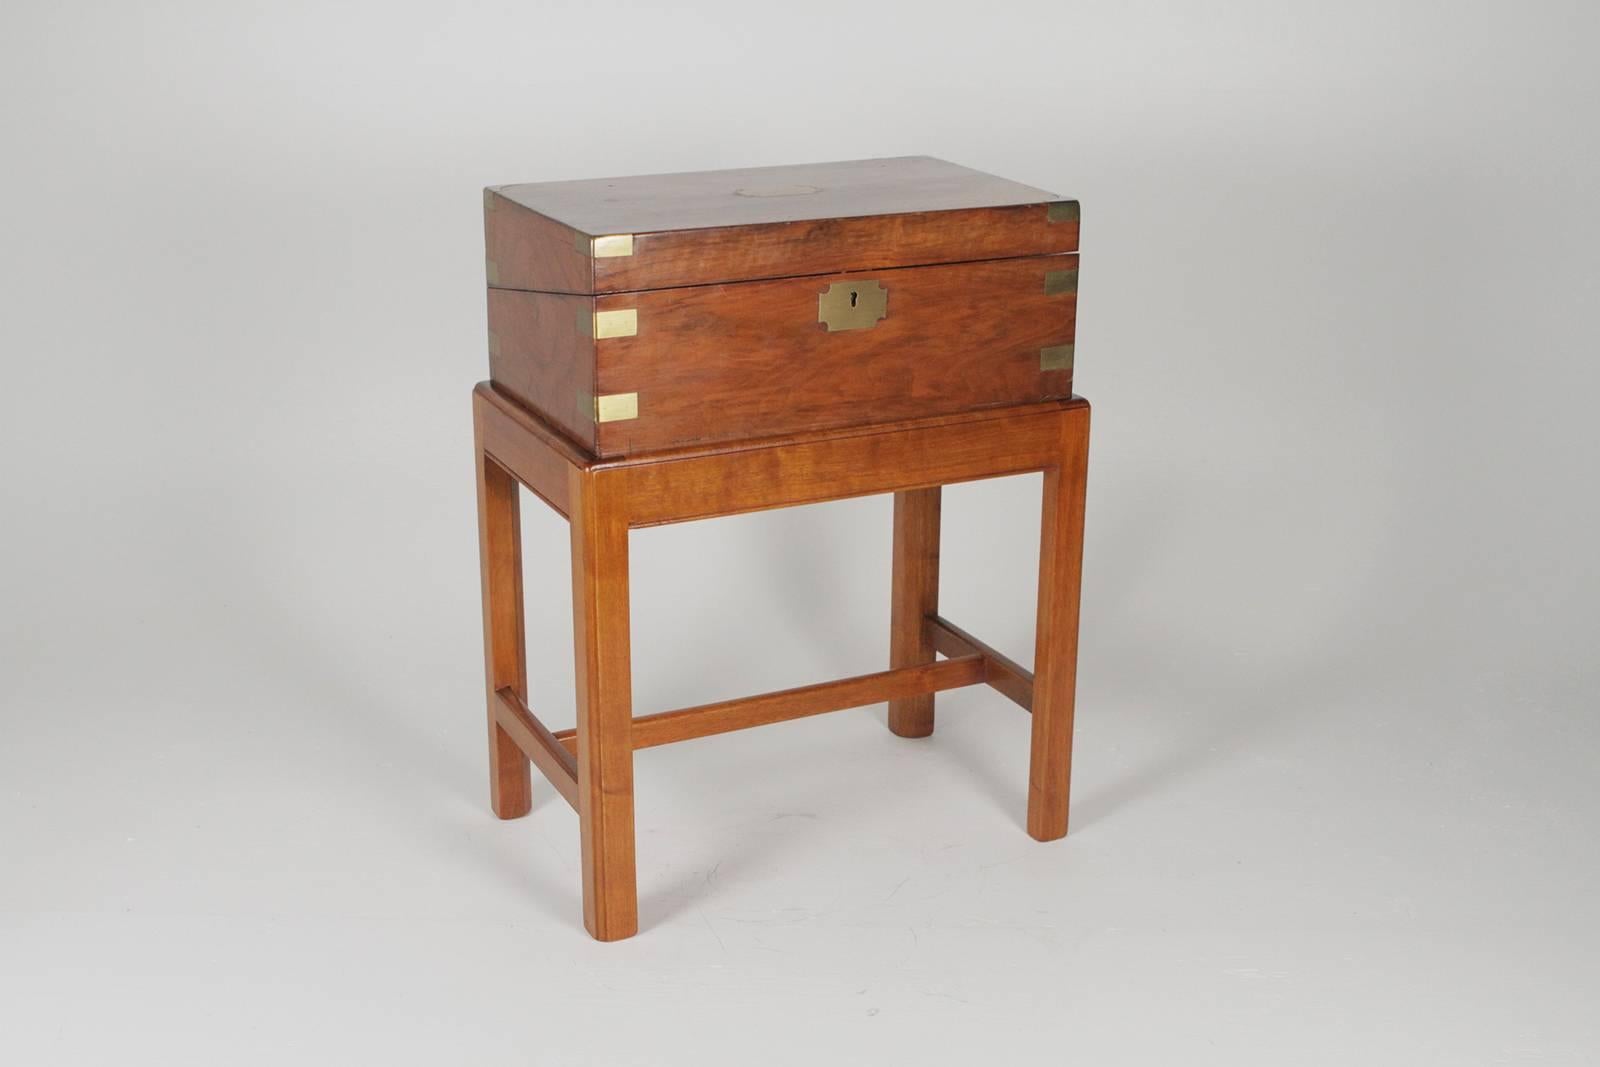 Writing desk on Stand stamped R E Johnson on base> The boxed lap desk with brass mounts opens to reveal a tooled leather surface with compartments for pens and indwells. The Stand in a Classic Chinese Chippendale style. Measures: 17 W x 10.5 D x